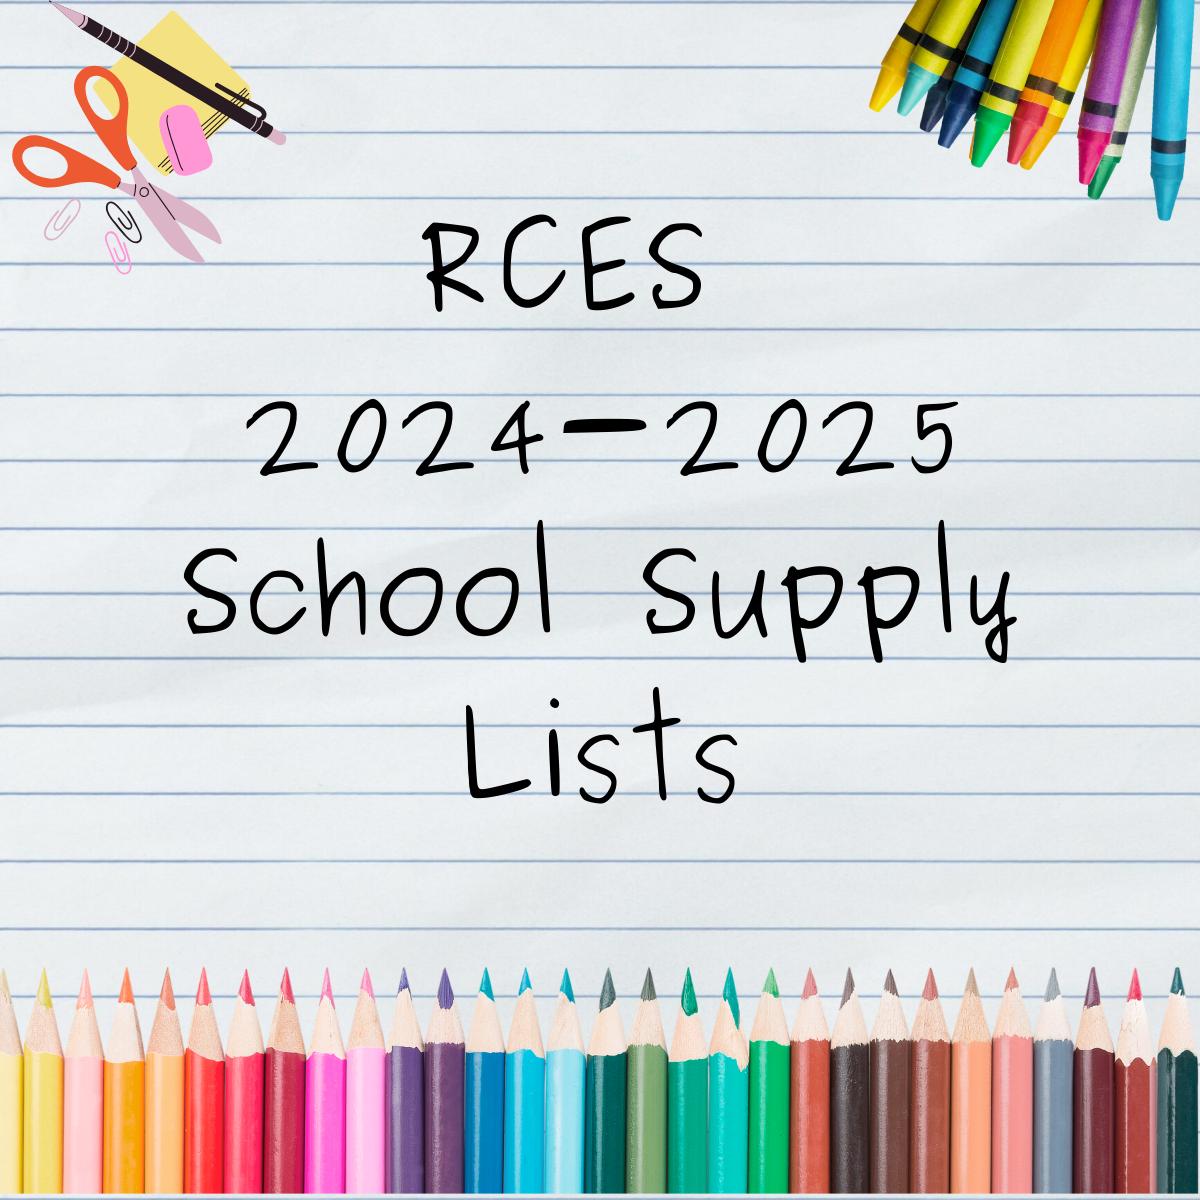 RCES 2024-2025 School Supply Lists